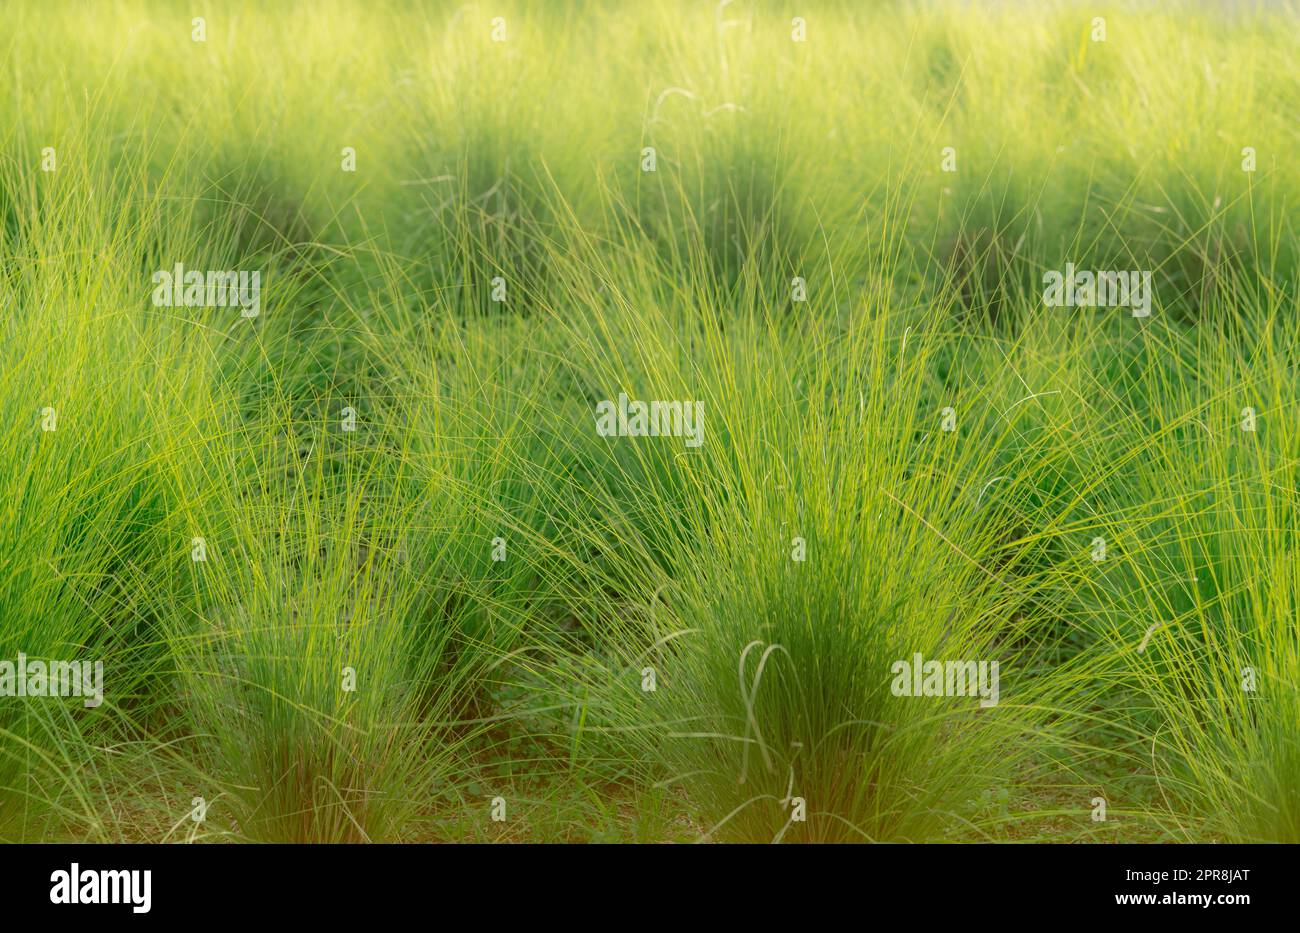 Green vetiver grass field. Vetiver System is used for soil and water conservation, mitigation and rehabilitation, and sediment control. Organic glue for soil sustainable development. Ornamental grass. Stock Photo